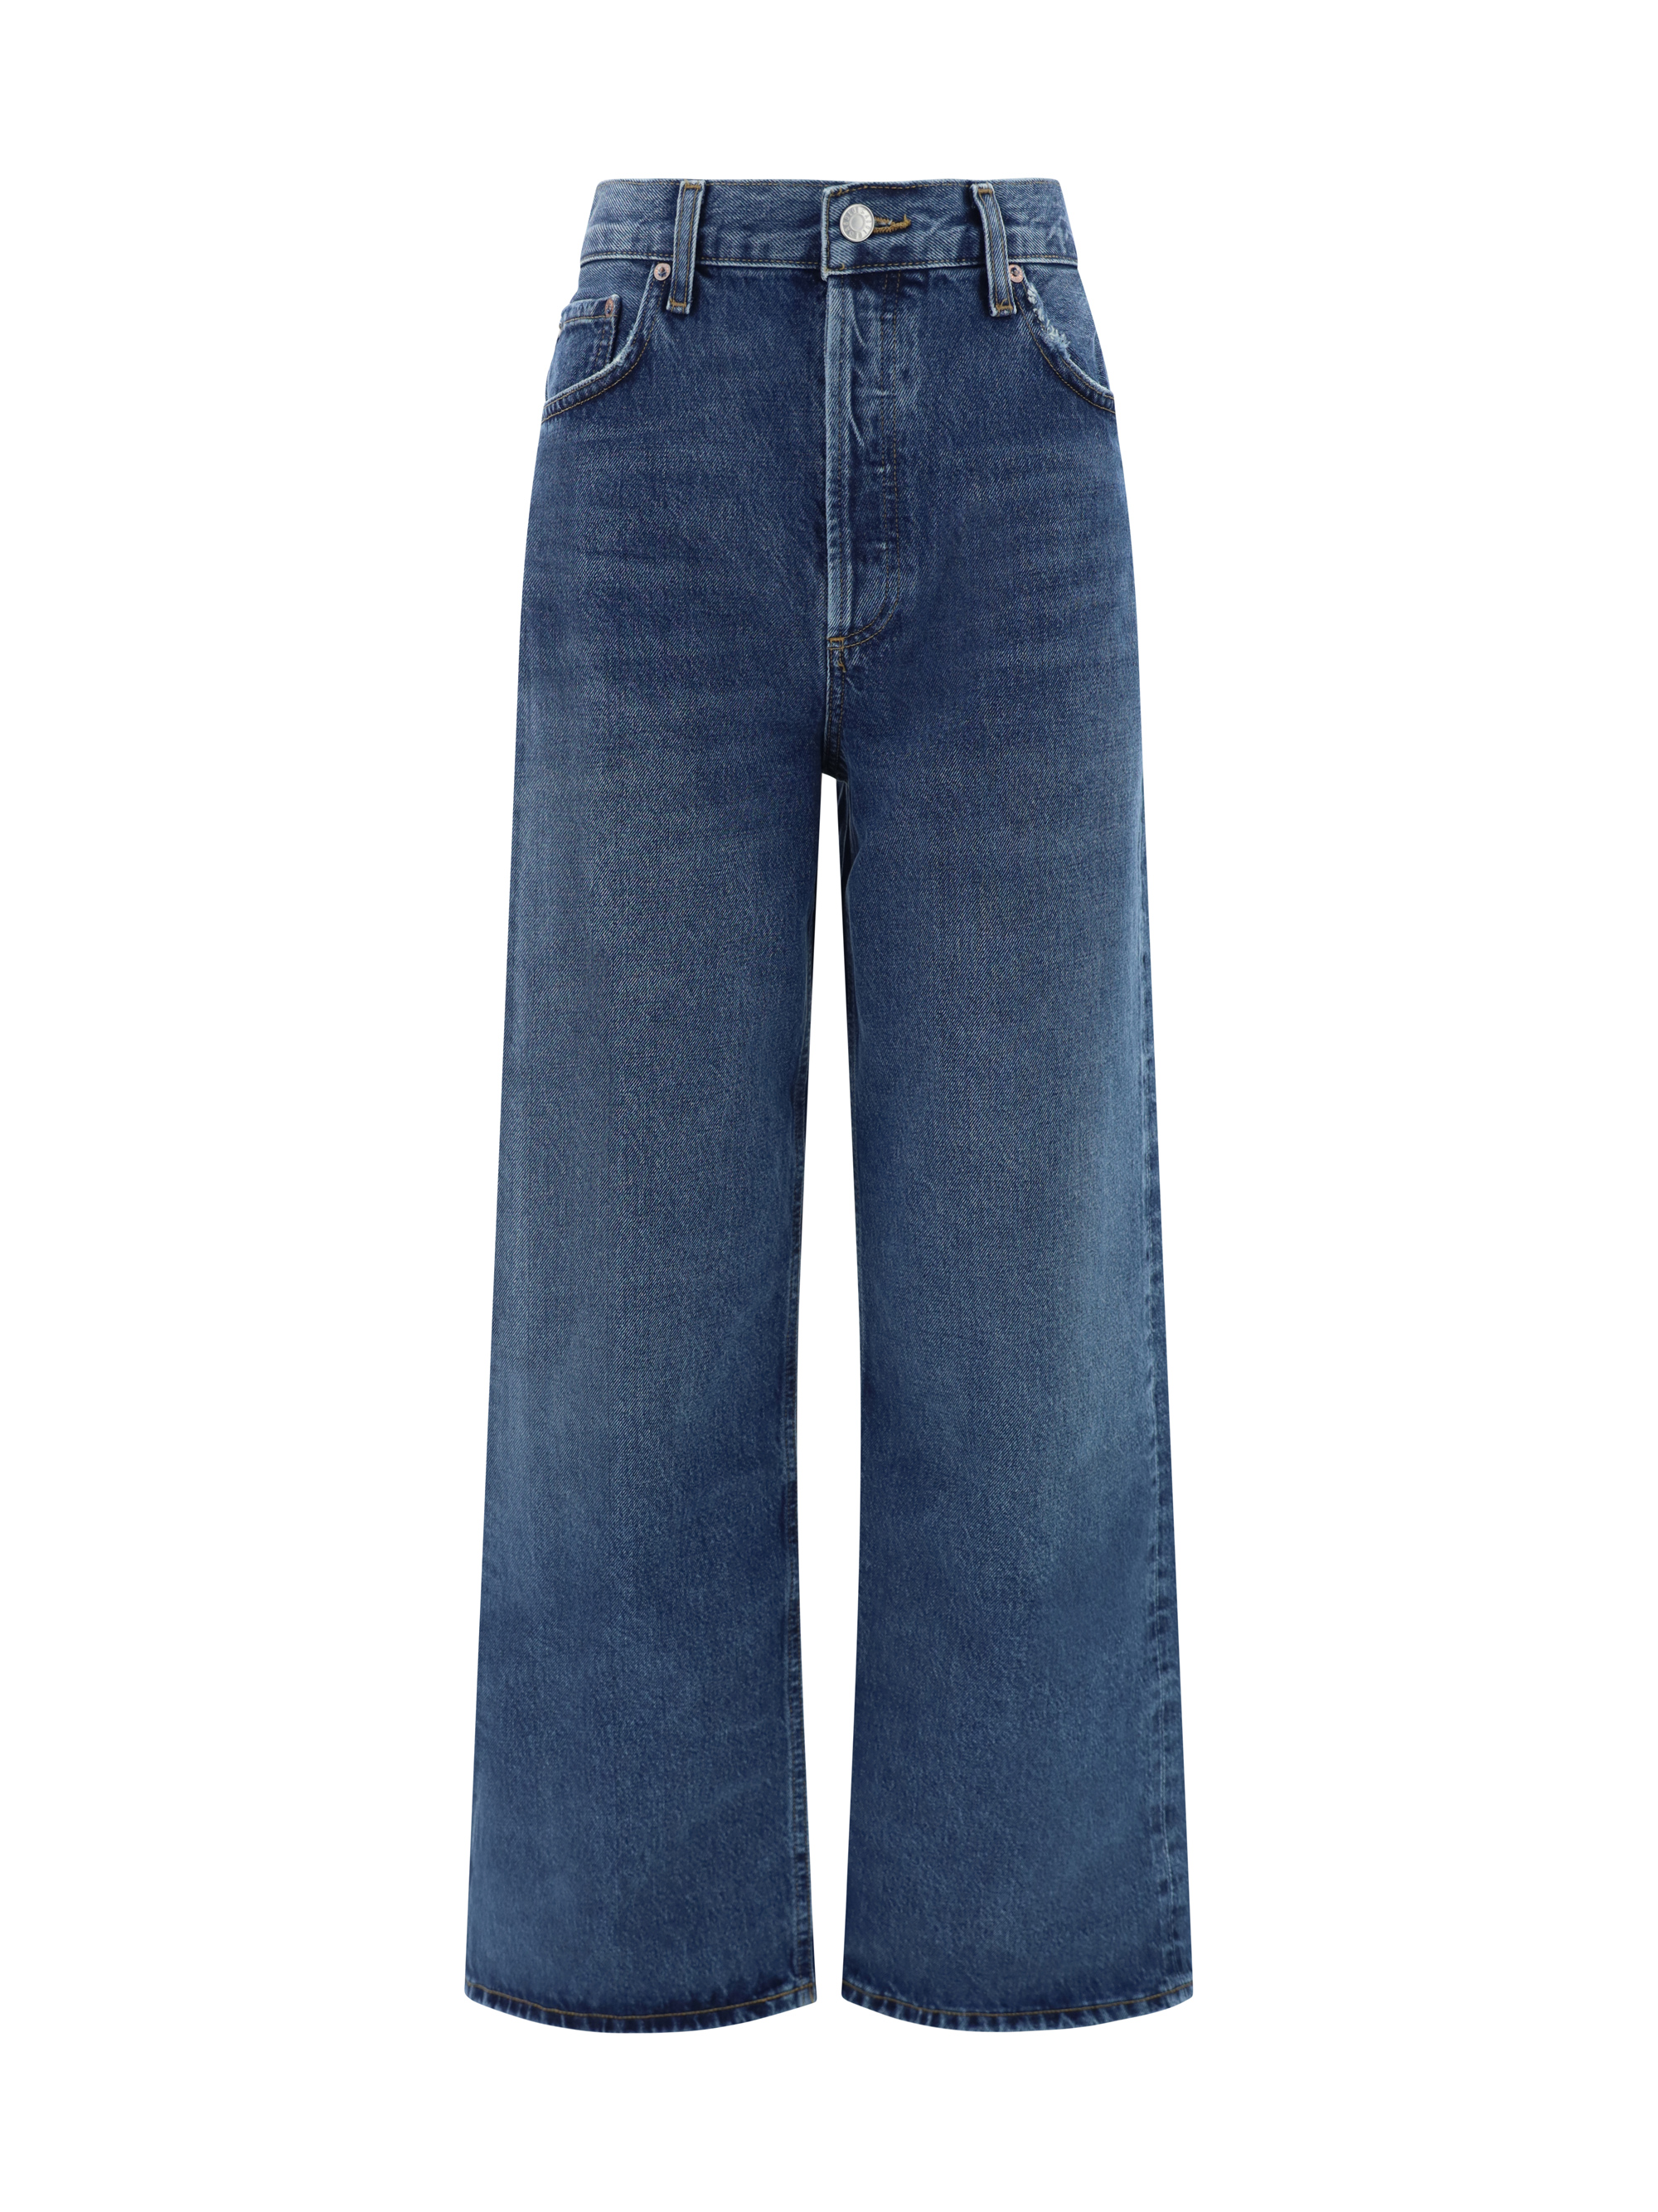 Agolde Jeans In Image